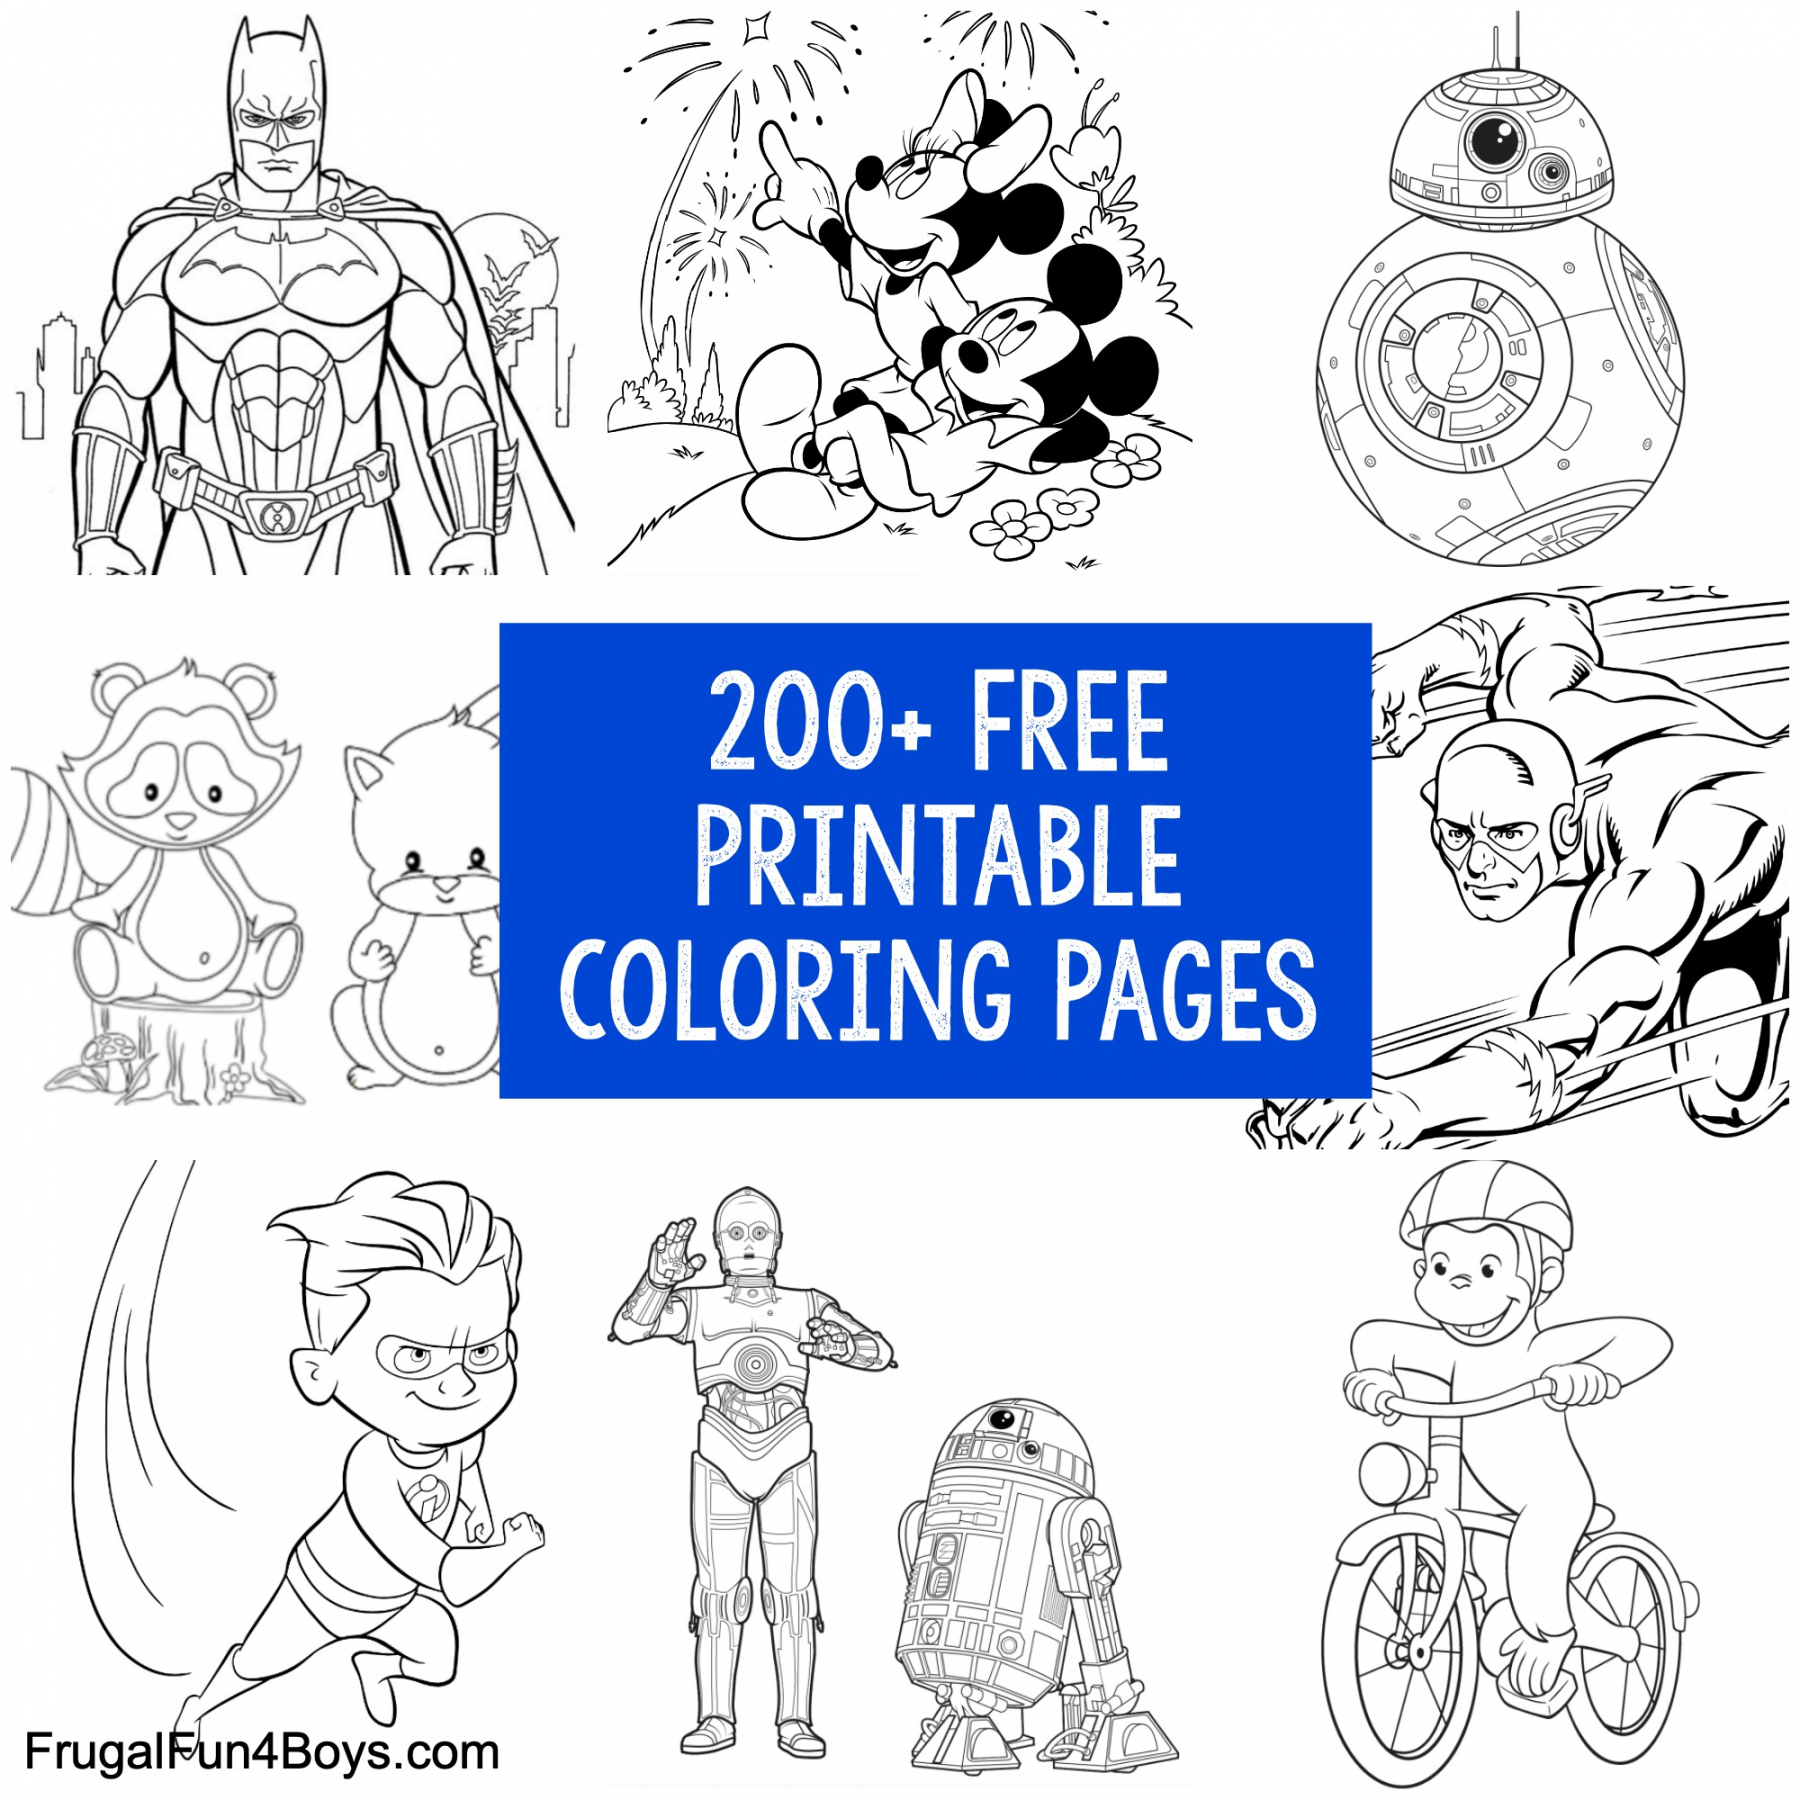 Free Printable Coloring Pages For Boys - Printable - + Printable Coloring Pages for Kids - Frugal Fun For Boys and Girls